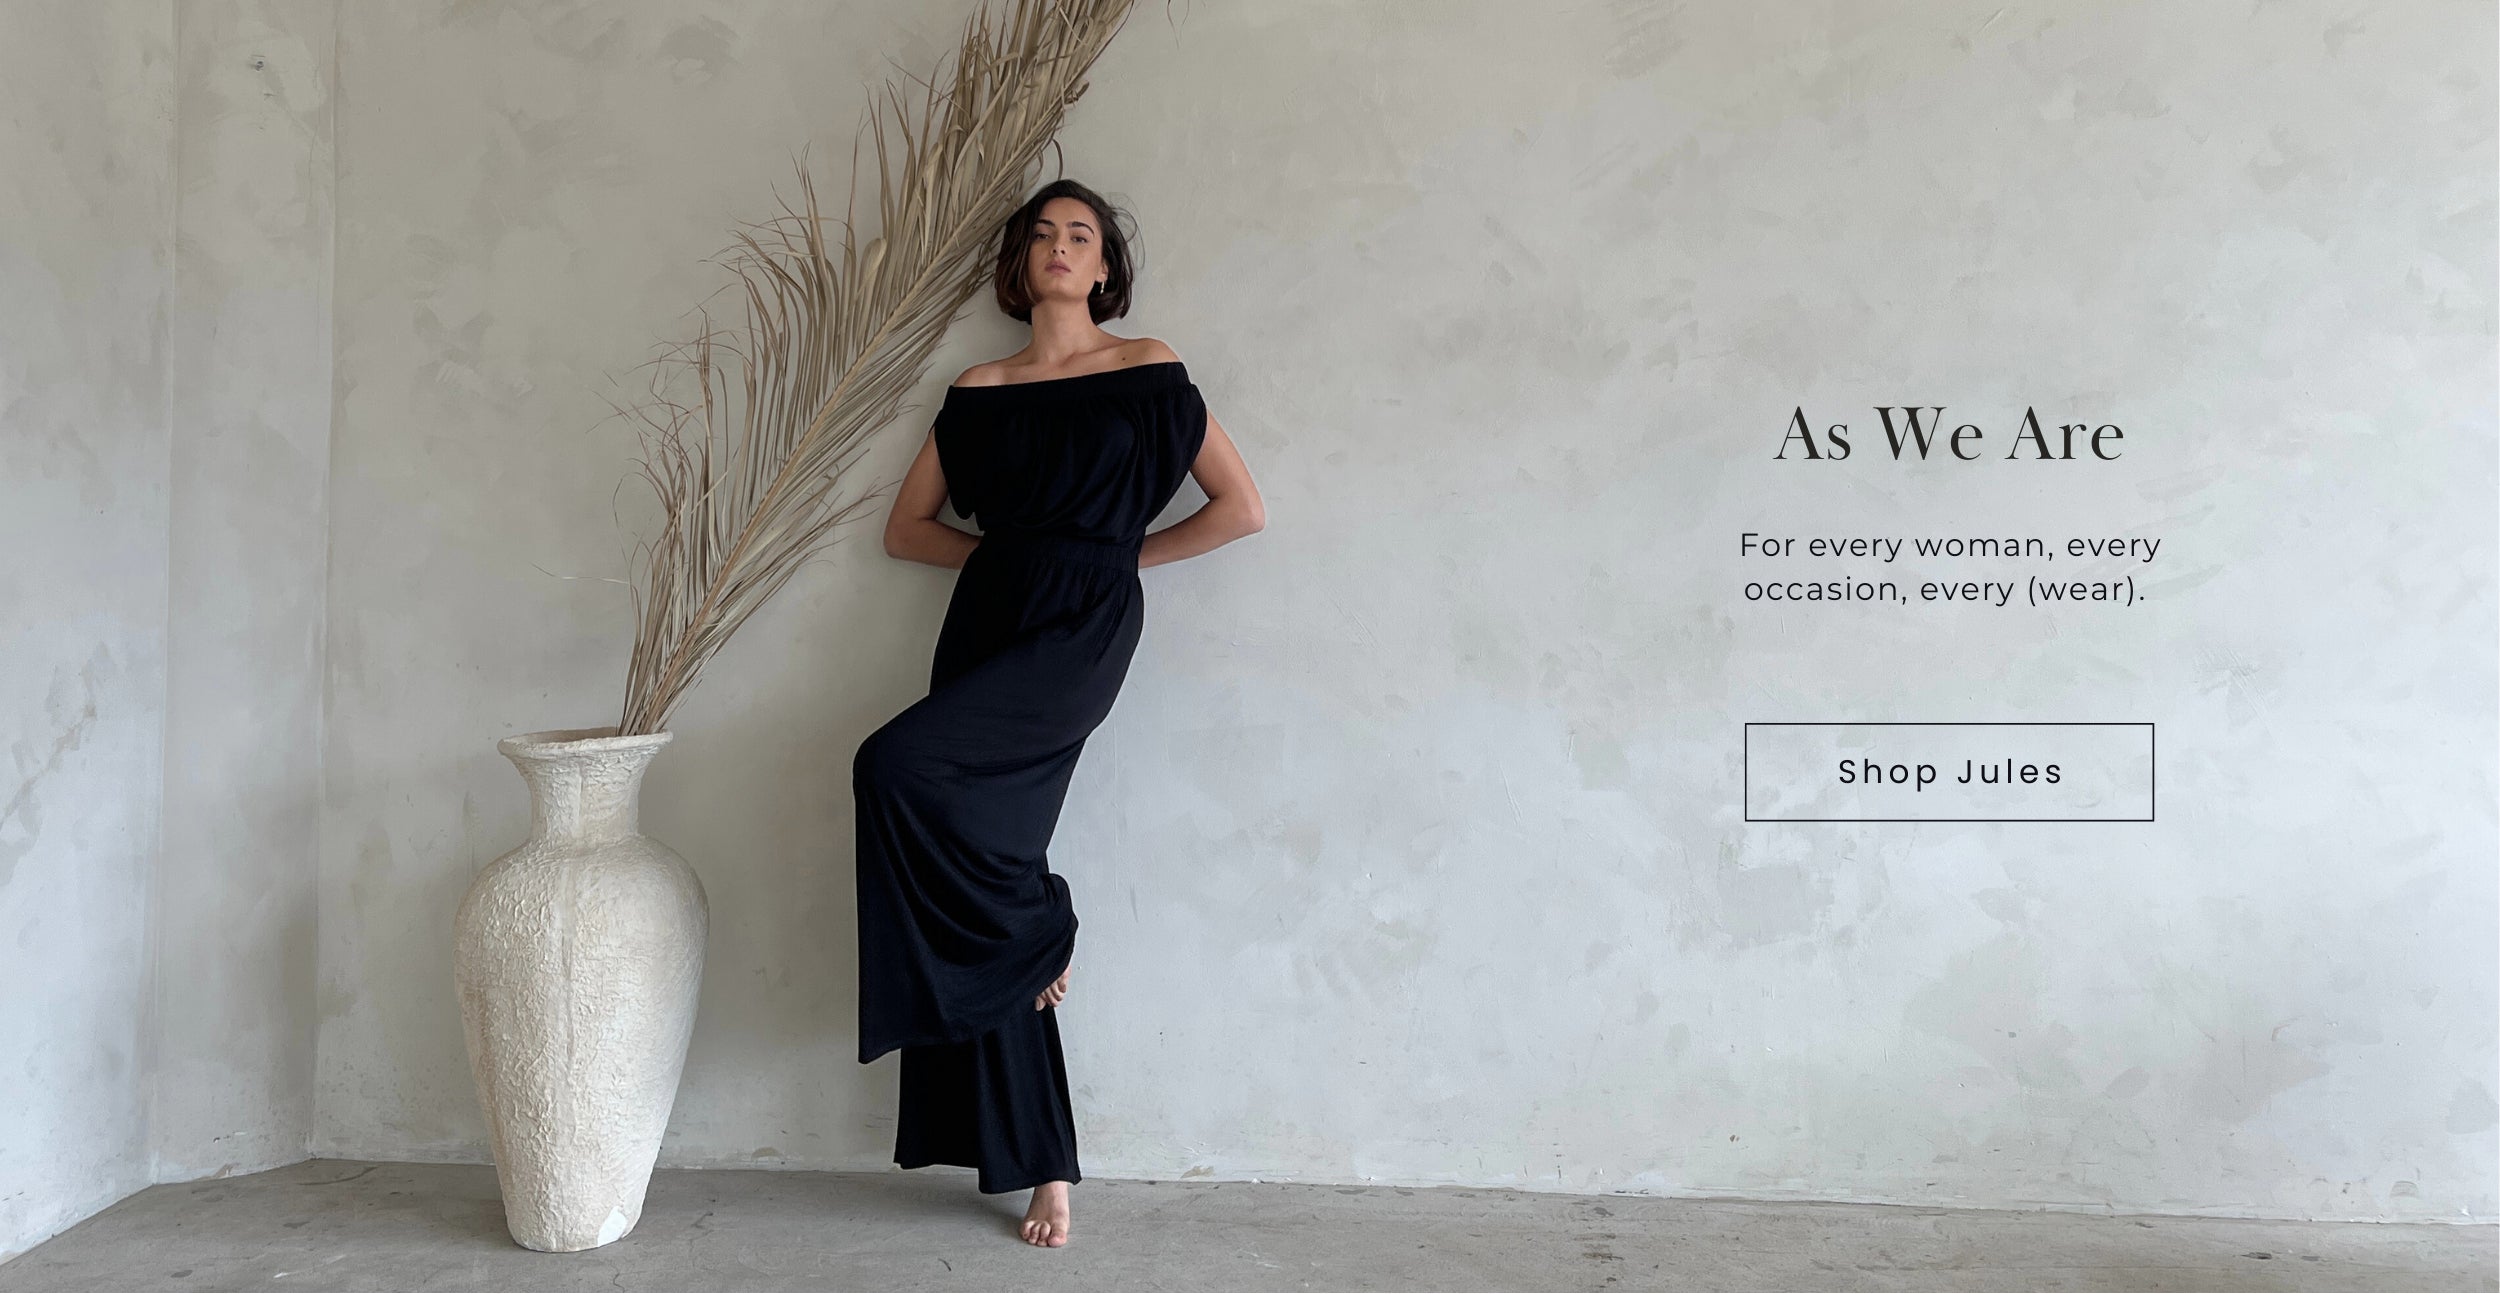 As We Are - For every woman, every occasion, every (wear). Shop Jules